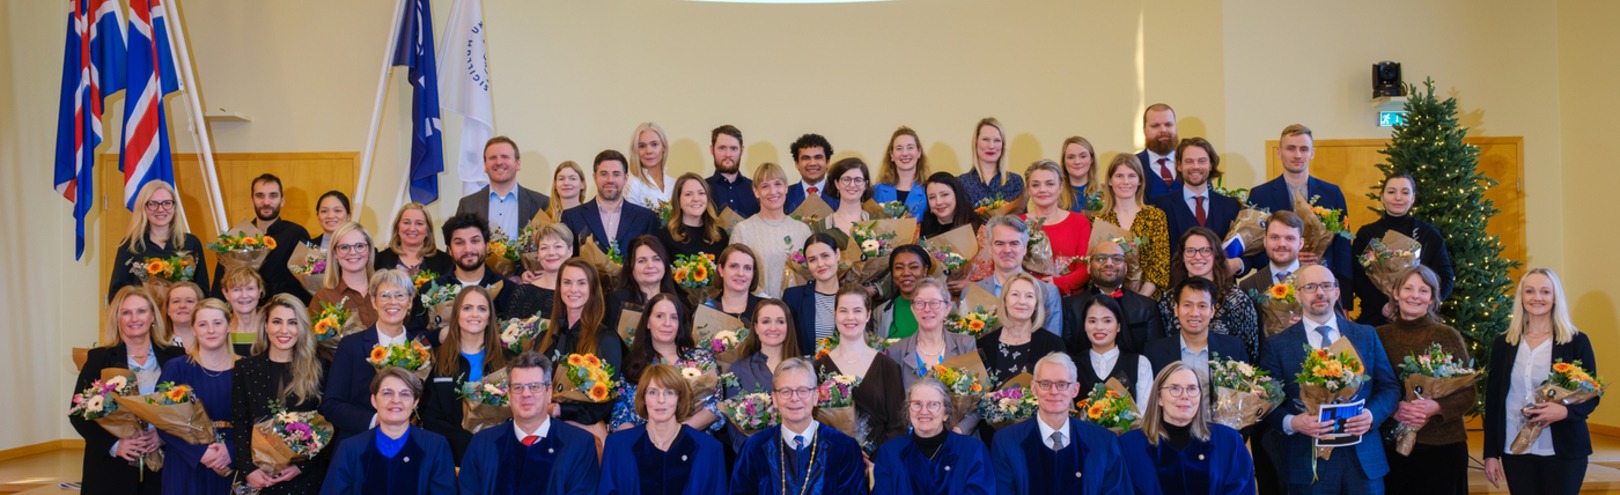 Over 80 candidates completed a PhD at the University in the past year - Available at University of Iceland